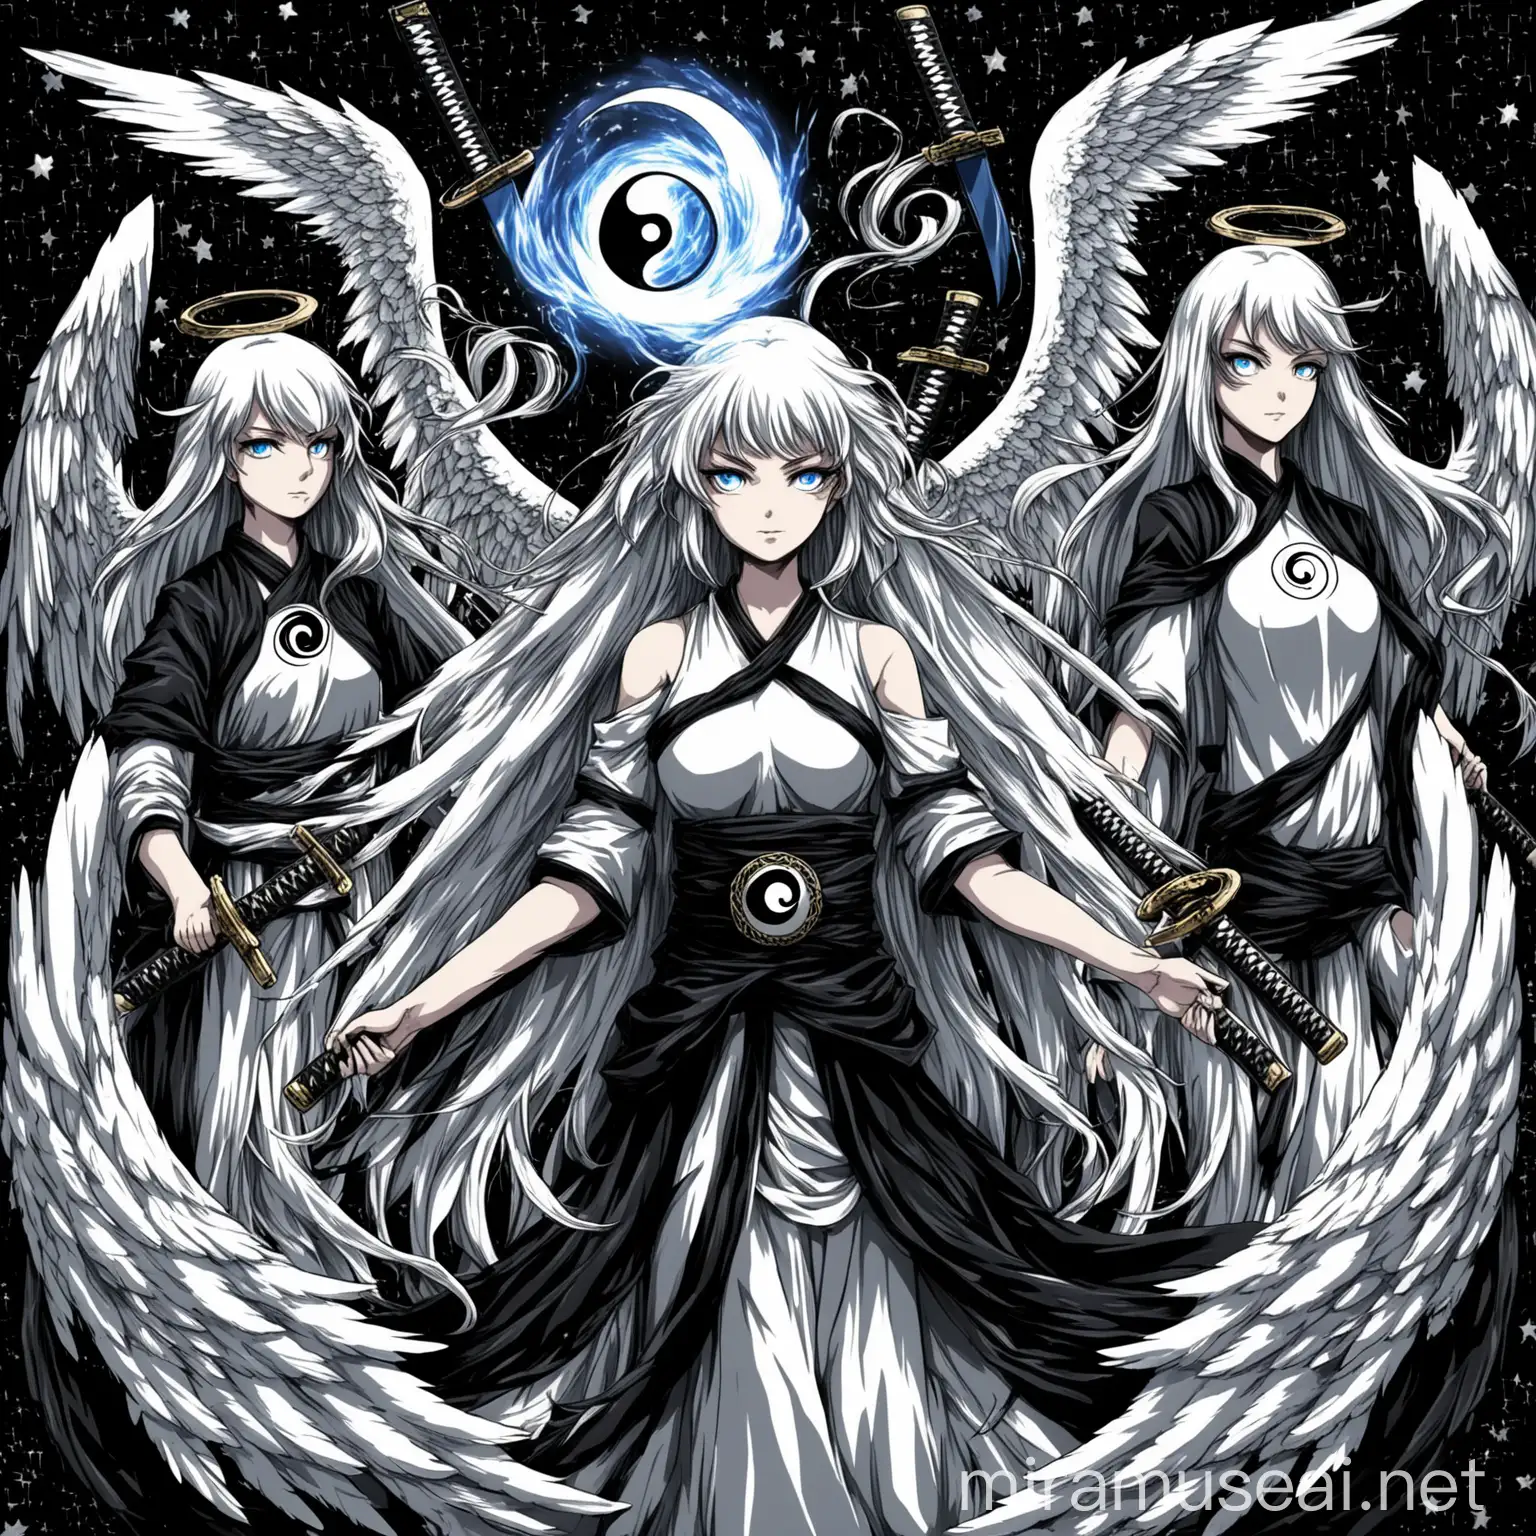 Generate for me an image in anime style but crazy where a girl with long black and white hair holds two katanas one is black with white highlights she possesses 6 angel wings three are white the others black the background is a battlefield with magic and so she comes from above but it's all tied to the ying and yang she herself also represents duality and destiny her eyes are bound it appears a magic formula with what looks like stars with the Duality